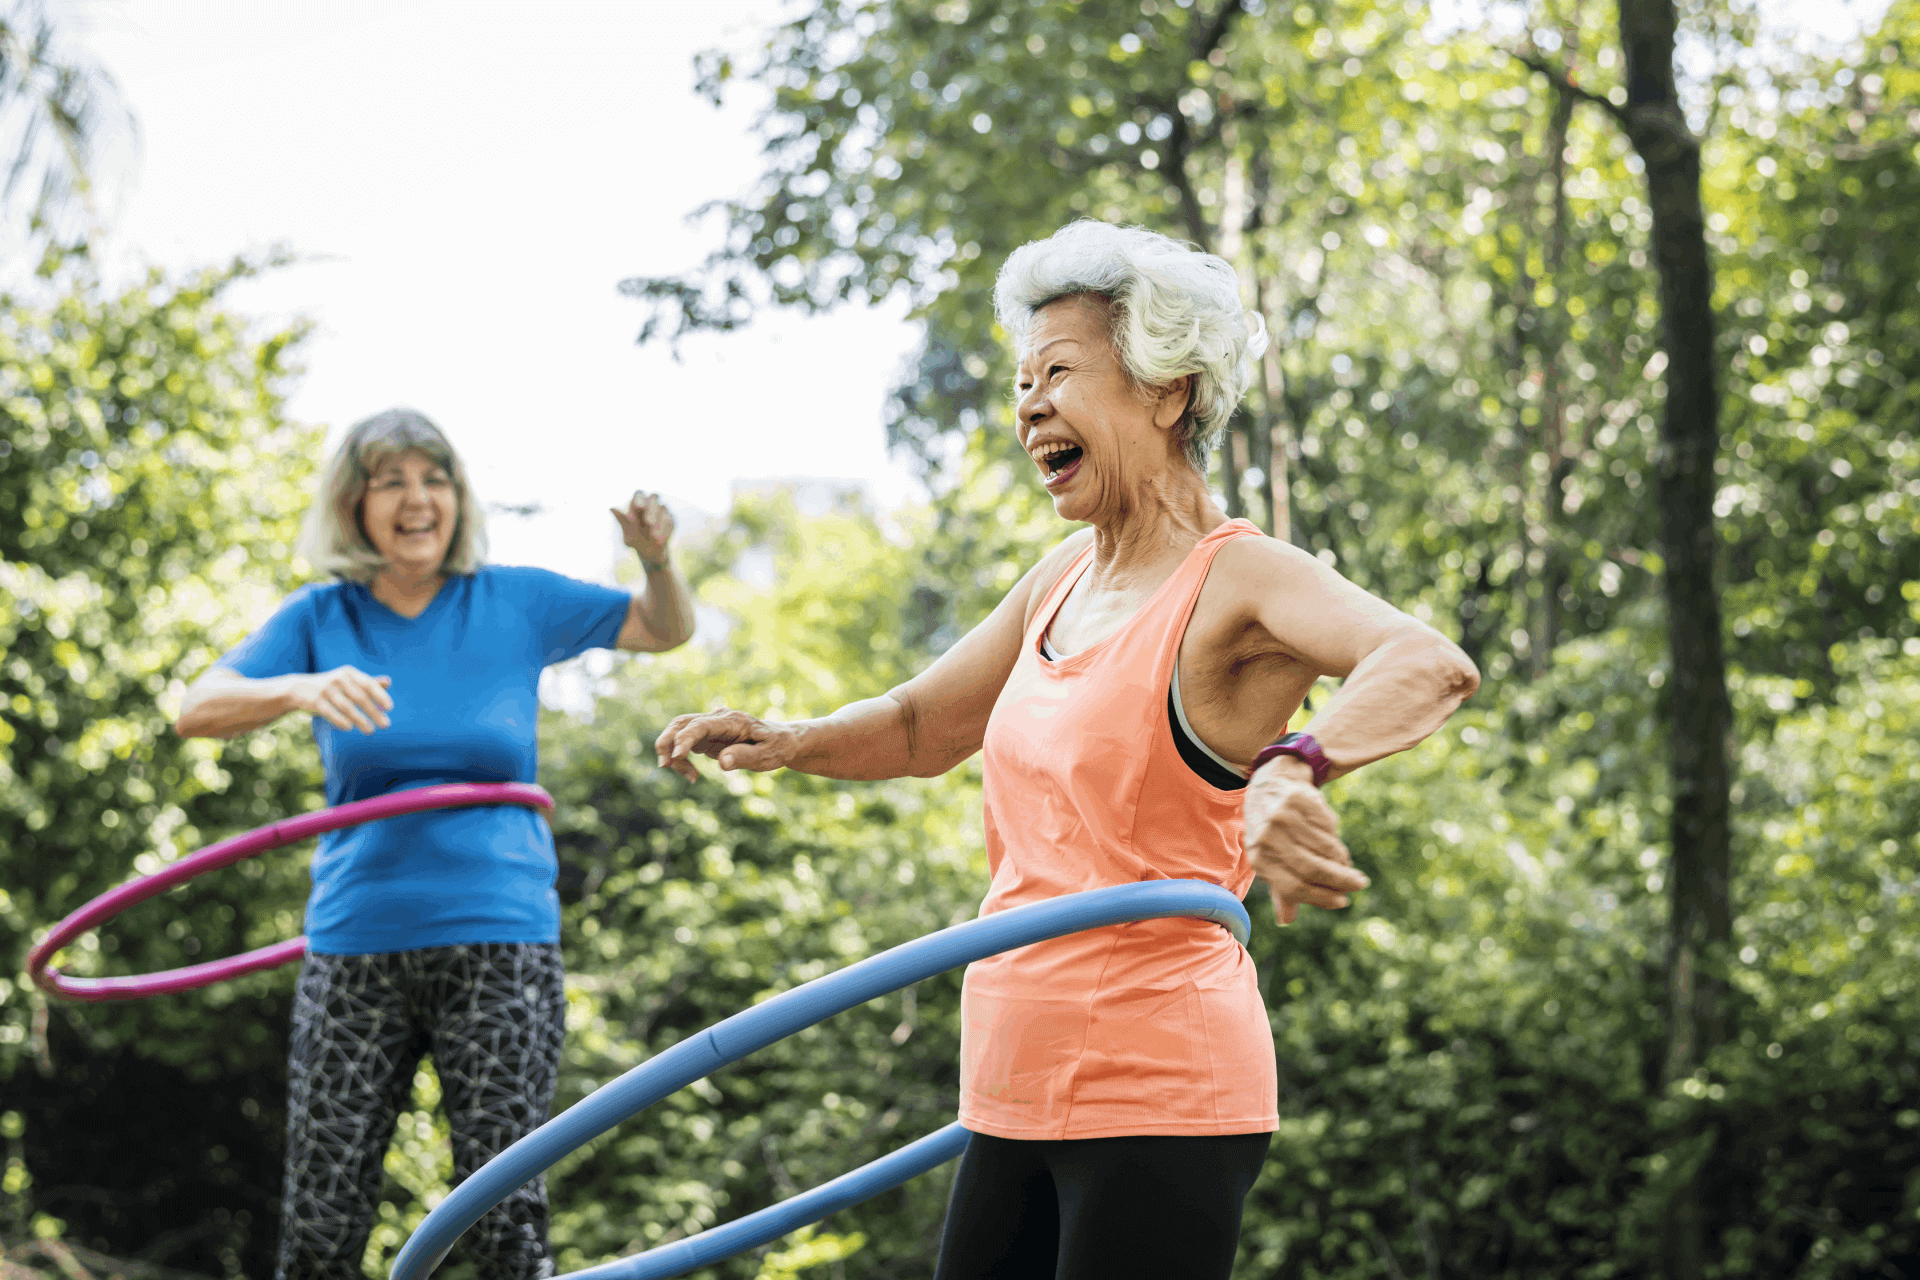 Elderly ladies smiling and enjoying a fun workout with hula hoops